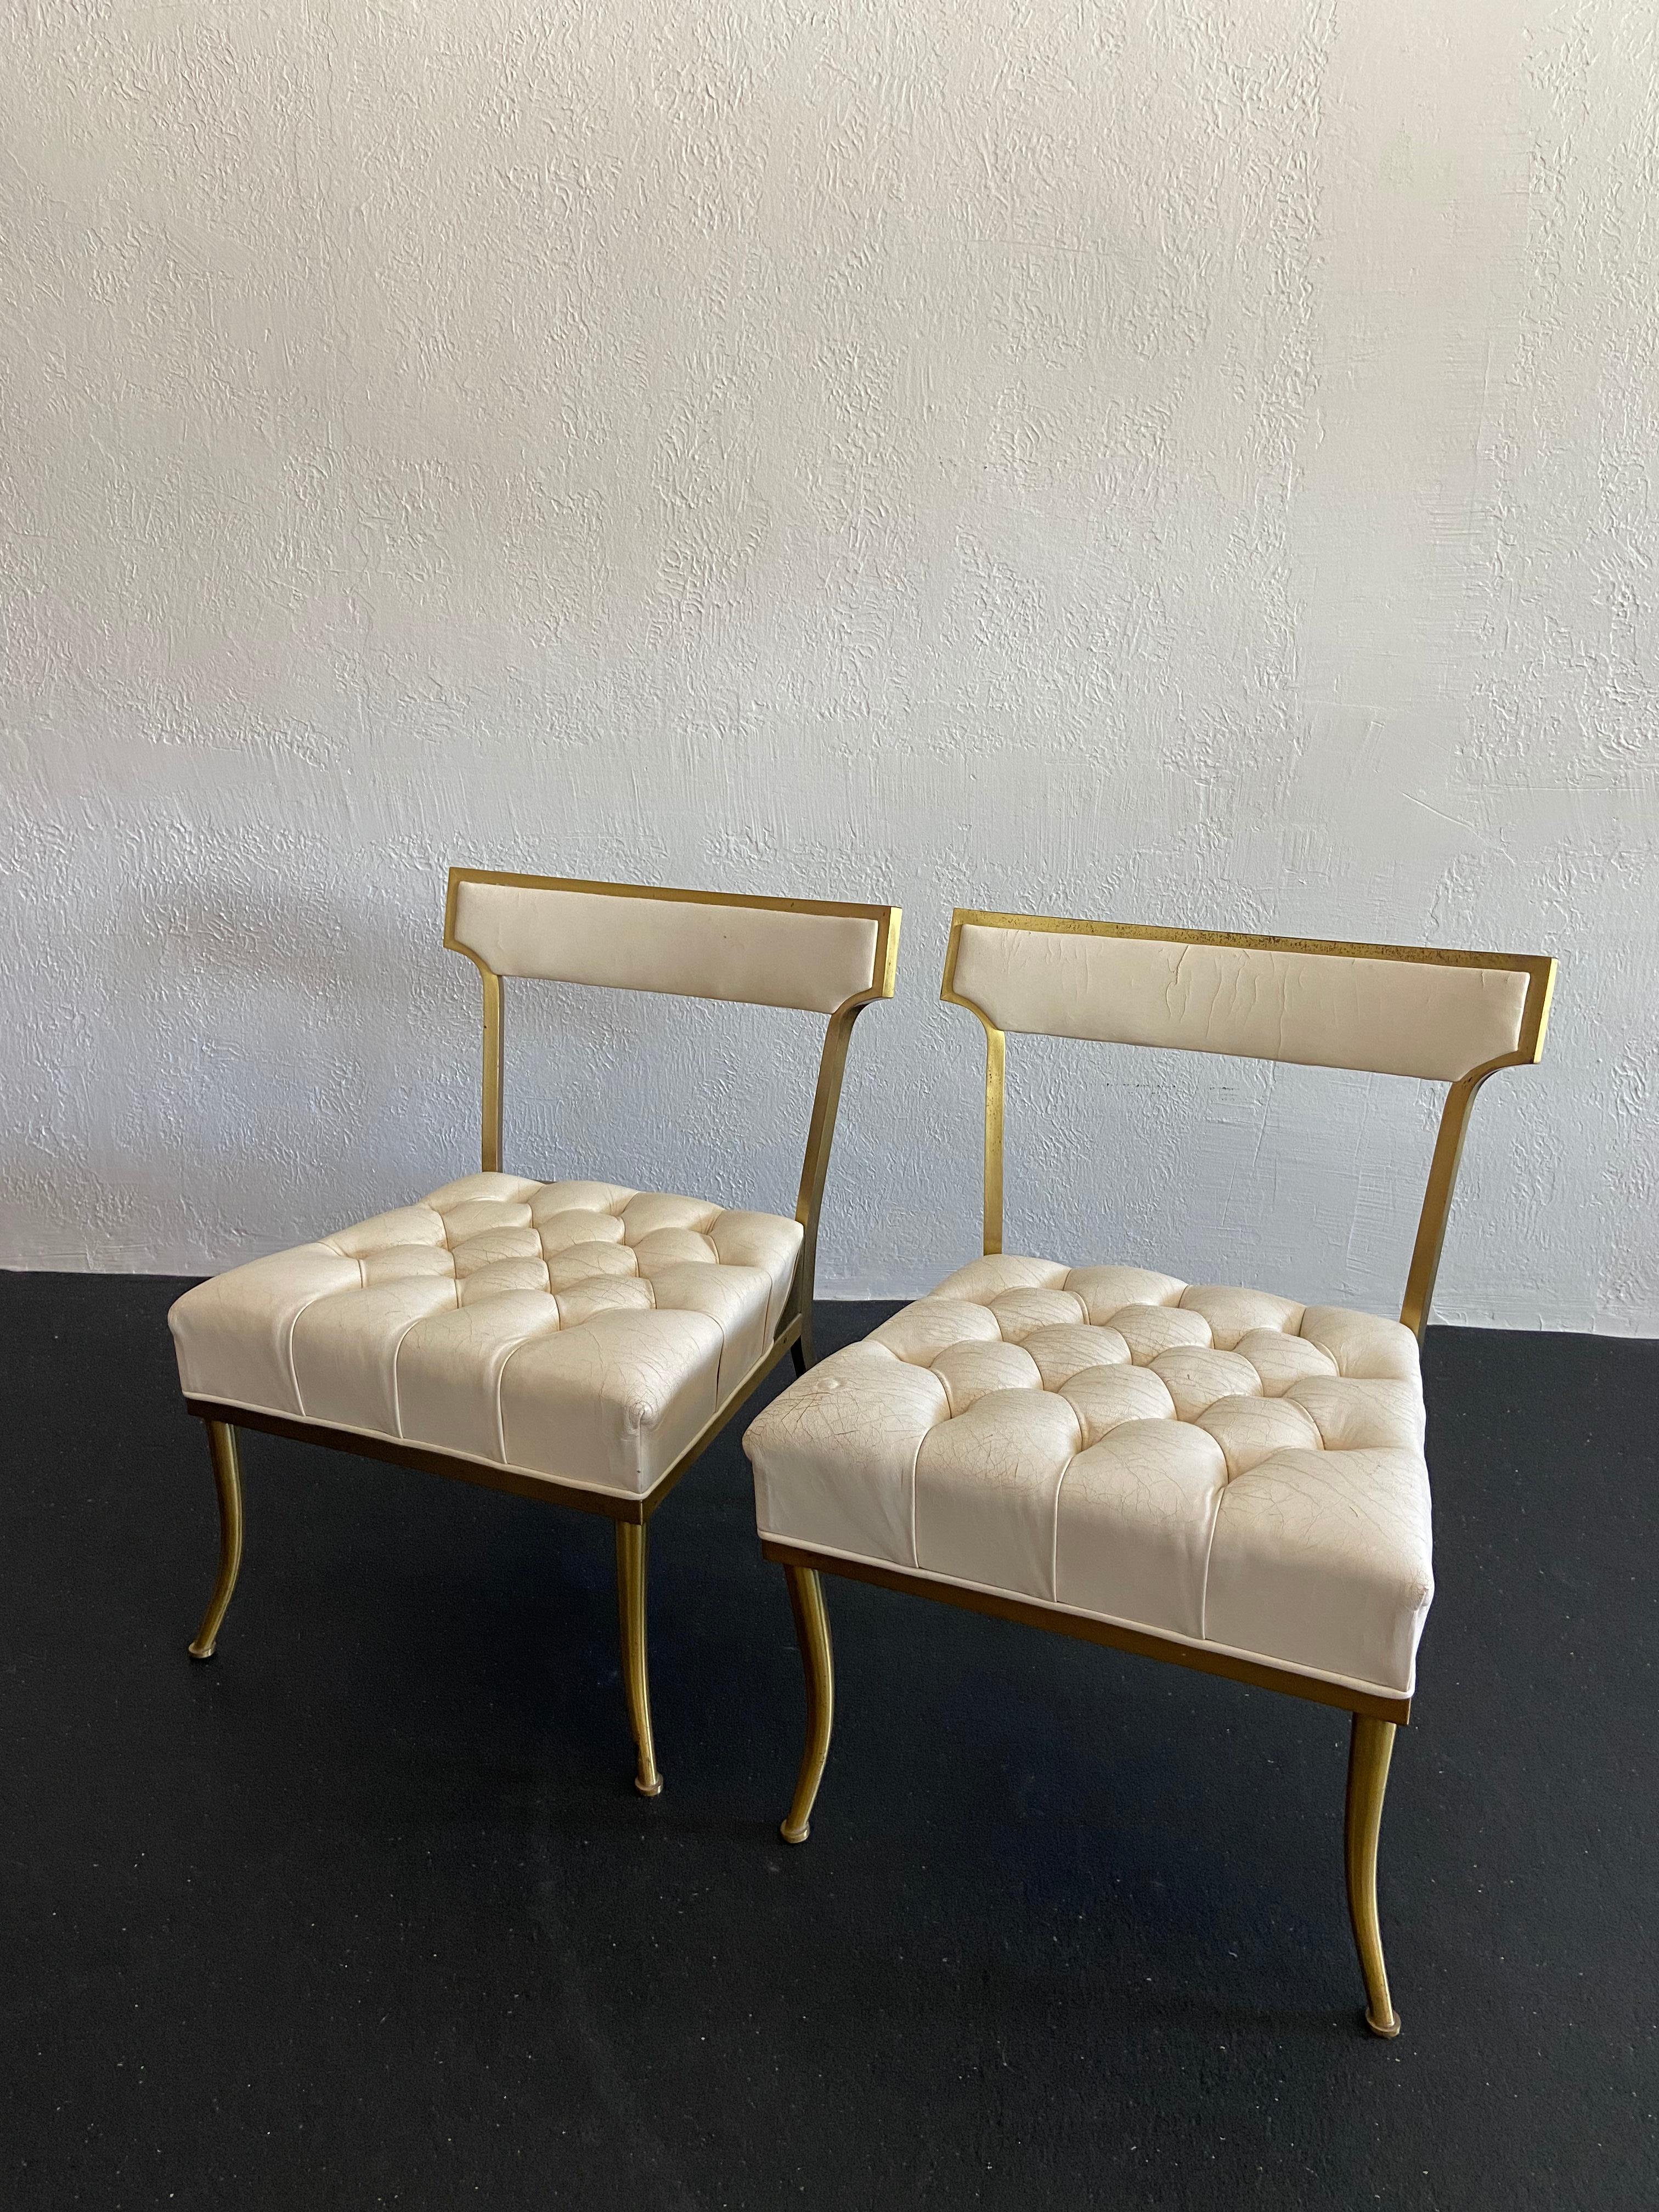 Pair of brass and leather occasional chairs attributed to William “Billy” Haines. Beautiful patina to the brass frames that have aged nicely. Reupholstery strongly recommended (please refer to photos).

Would work well in a variety of interiors such